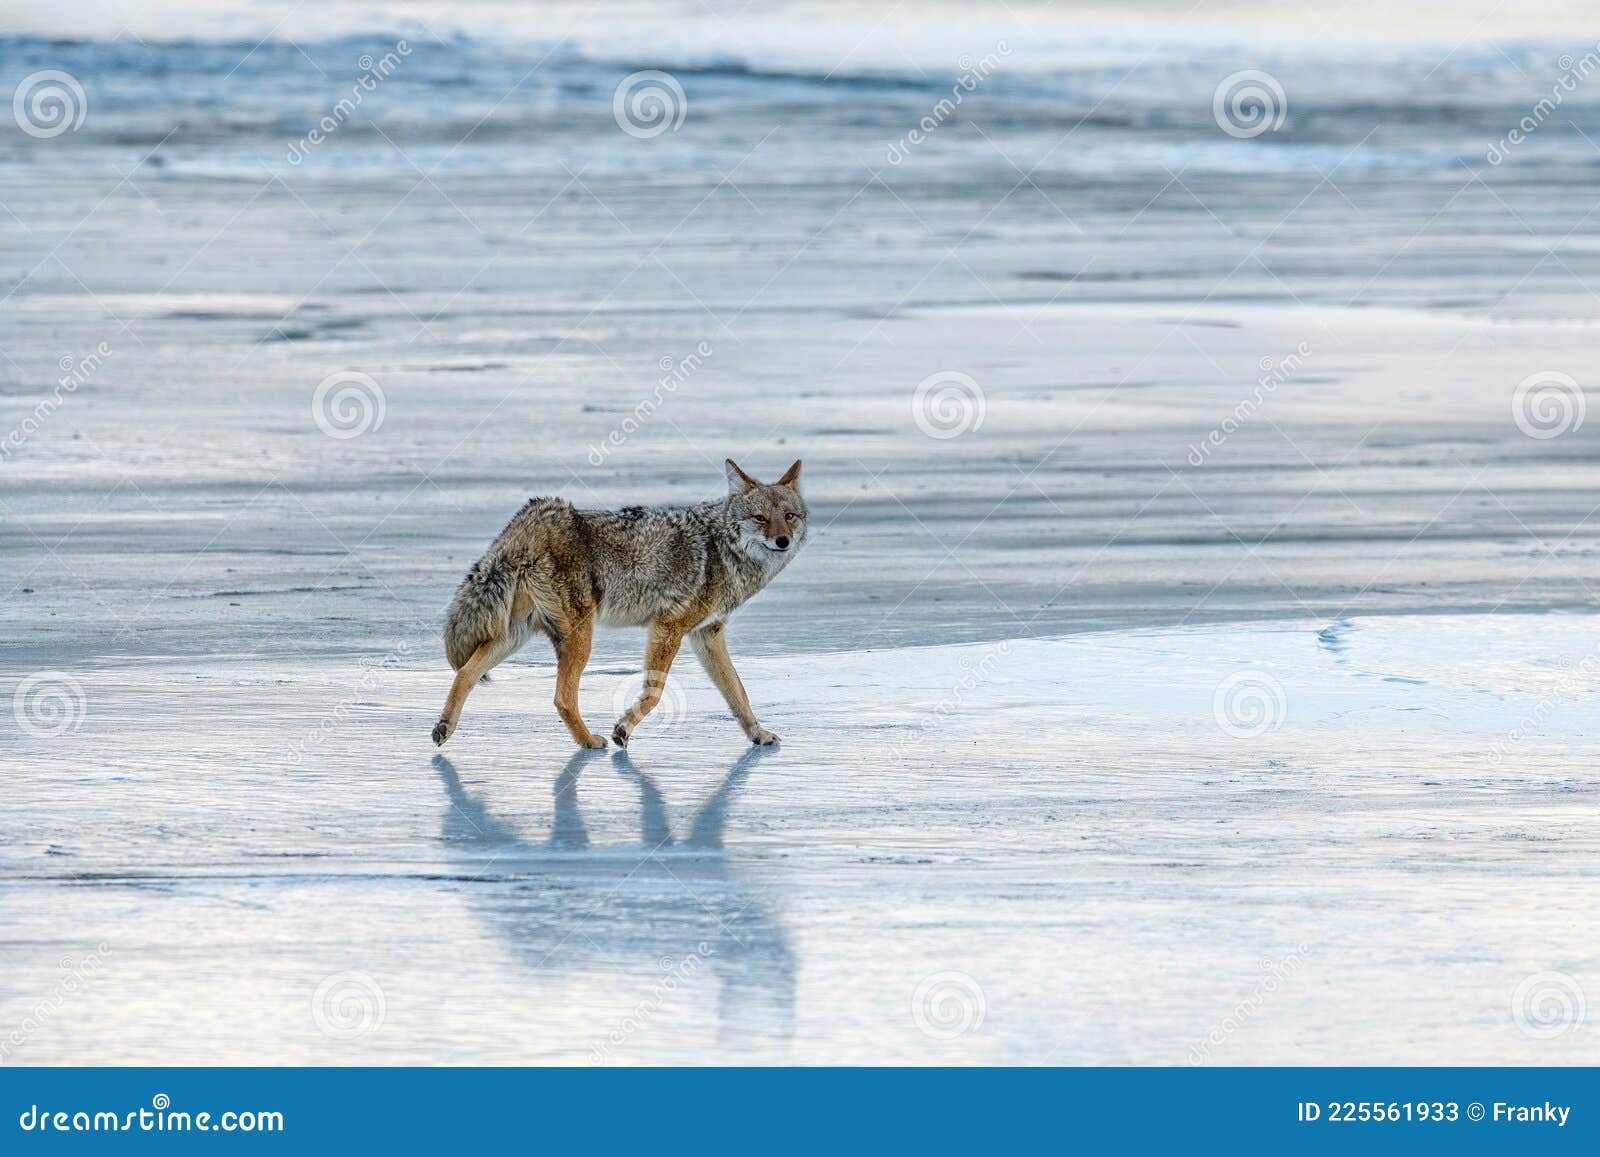 coyote canis latrans howling on the frozen snowy and icy riverbank during winter in jasper national park